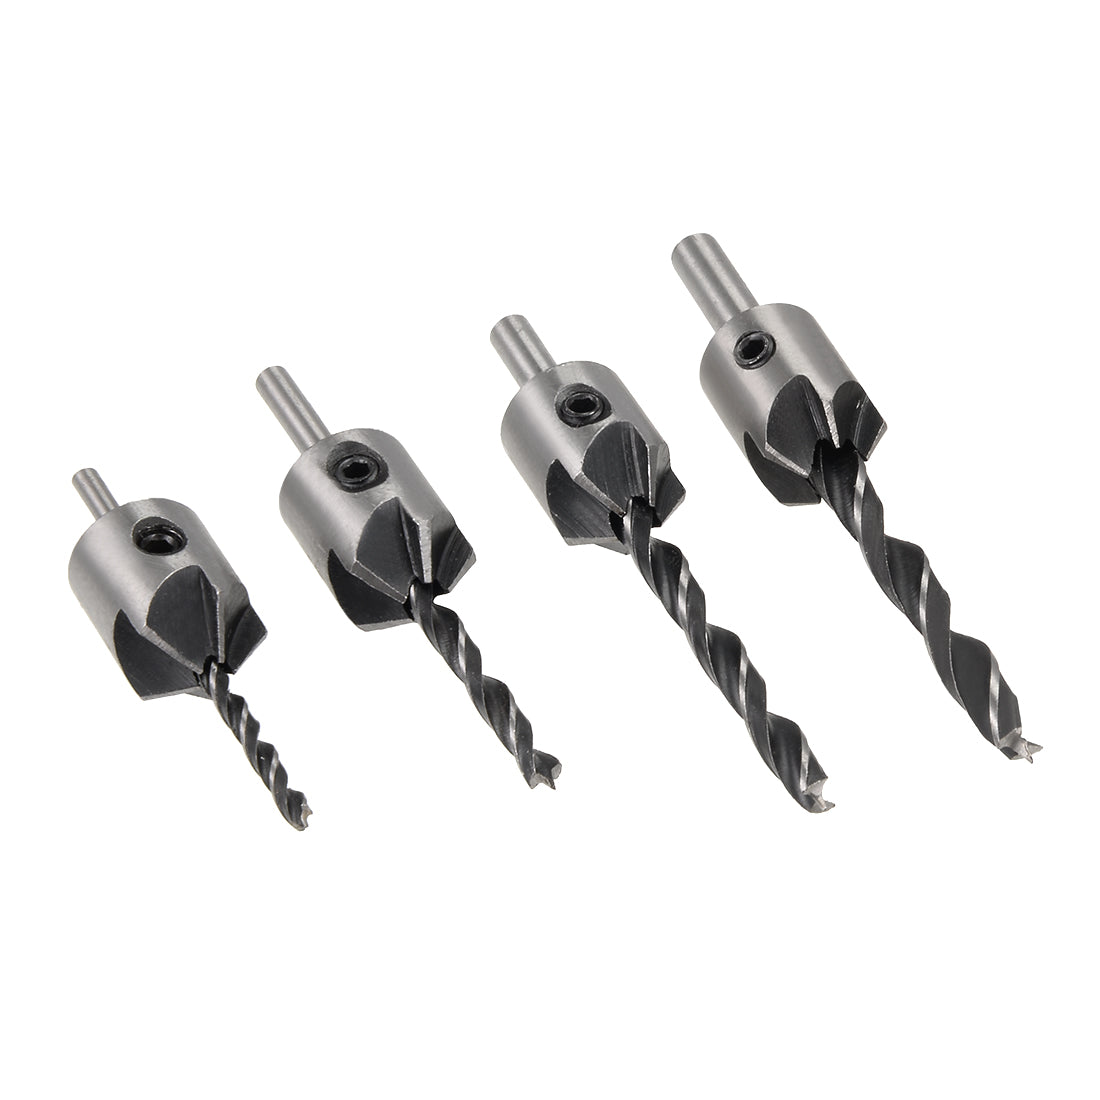 uxcell Uxcell Countersink Drill Bits for Wood 3mm to 6mm Adjustable Reamer with Hex Wrench for Punch Tool Woodworking Carpentry DIY HSS 4in1 Set